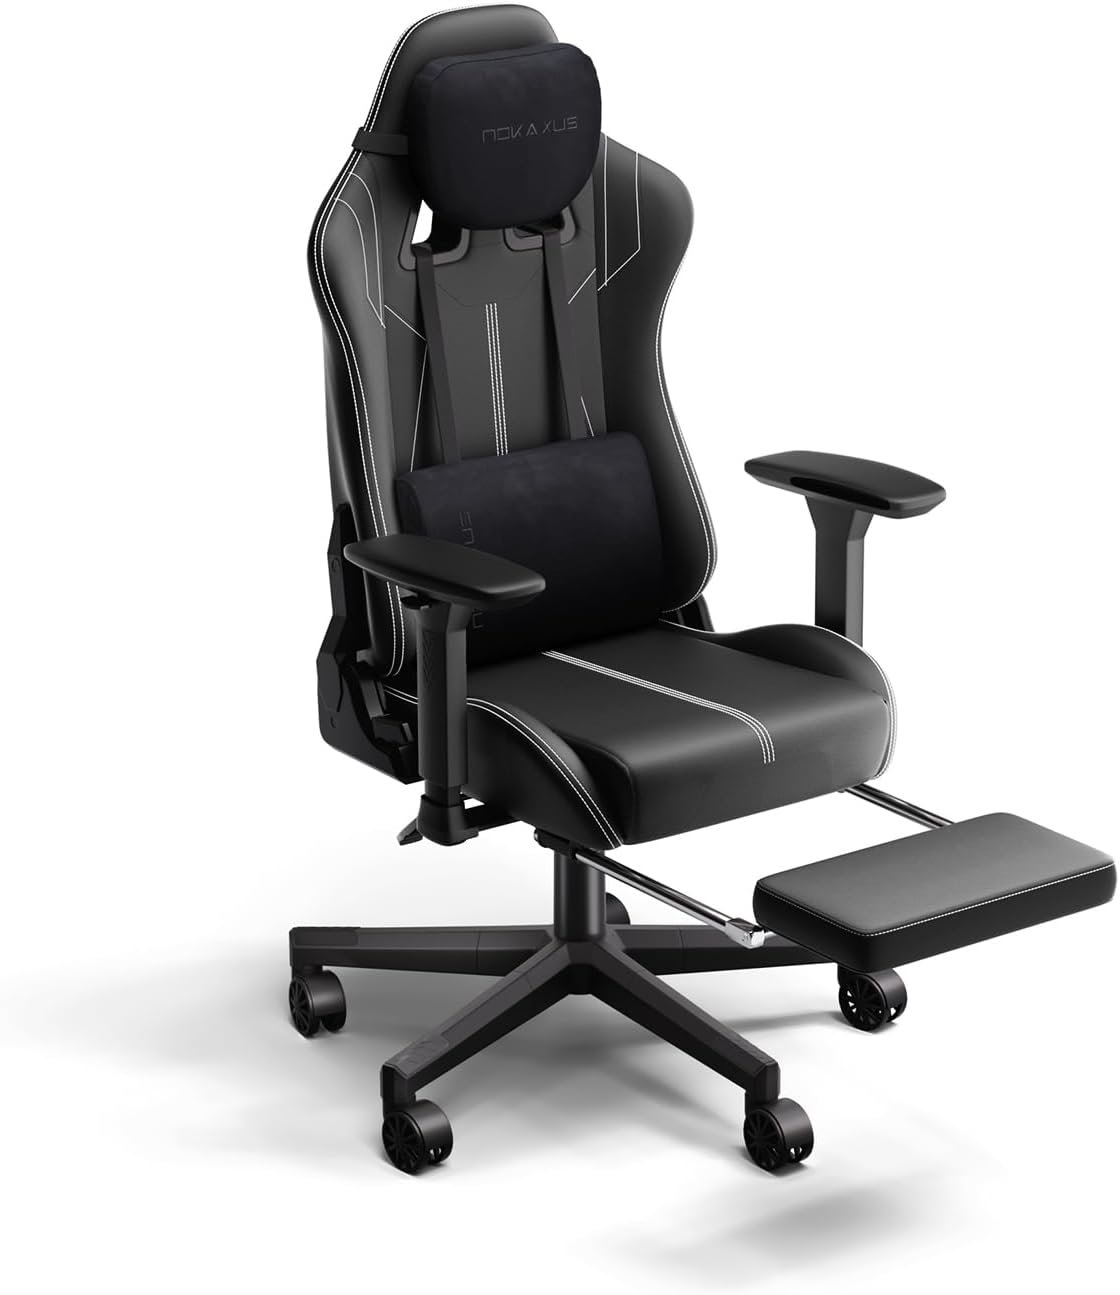 NOKAXUS Gaming Chair with Retractible Footrest Adjustment of backrest Thickening sponges Swivel Office Chair with Massager Function (YK-6008A-BALCK